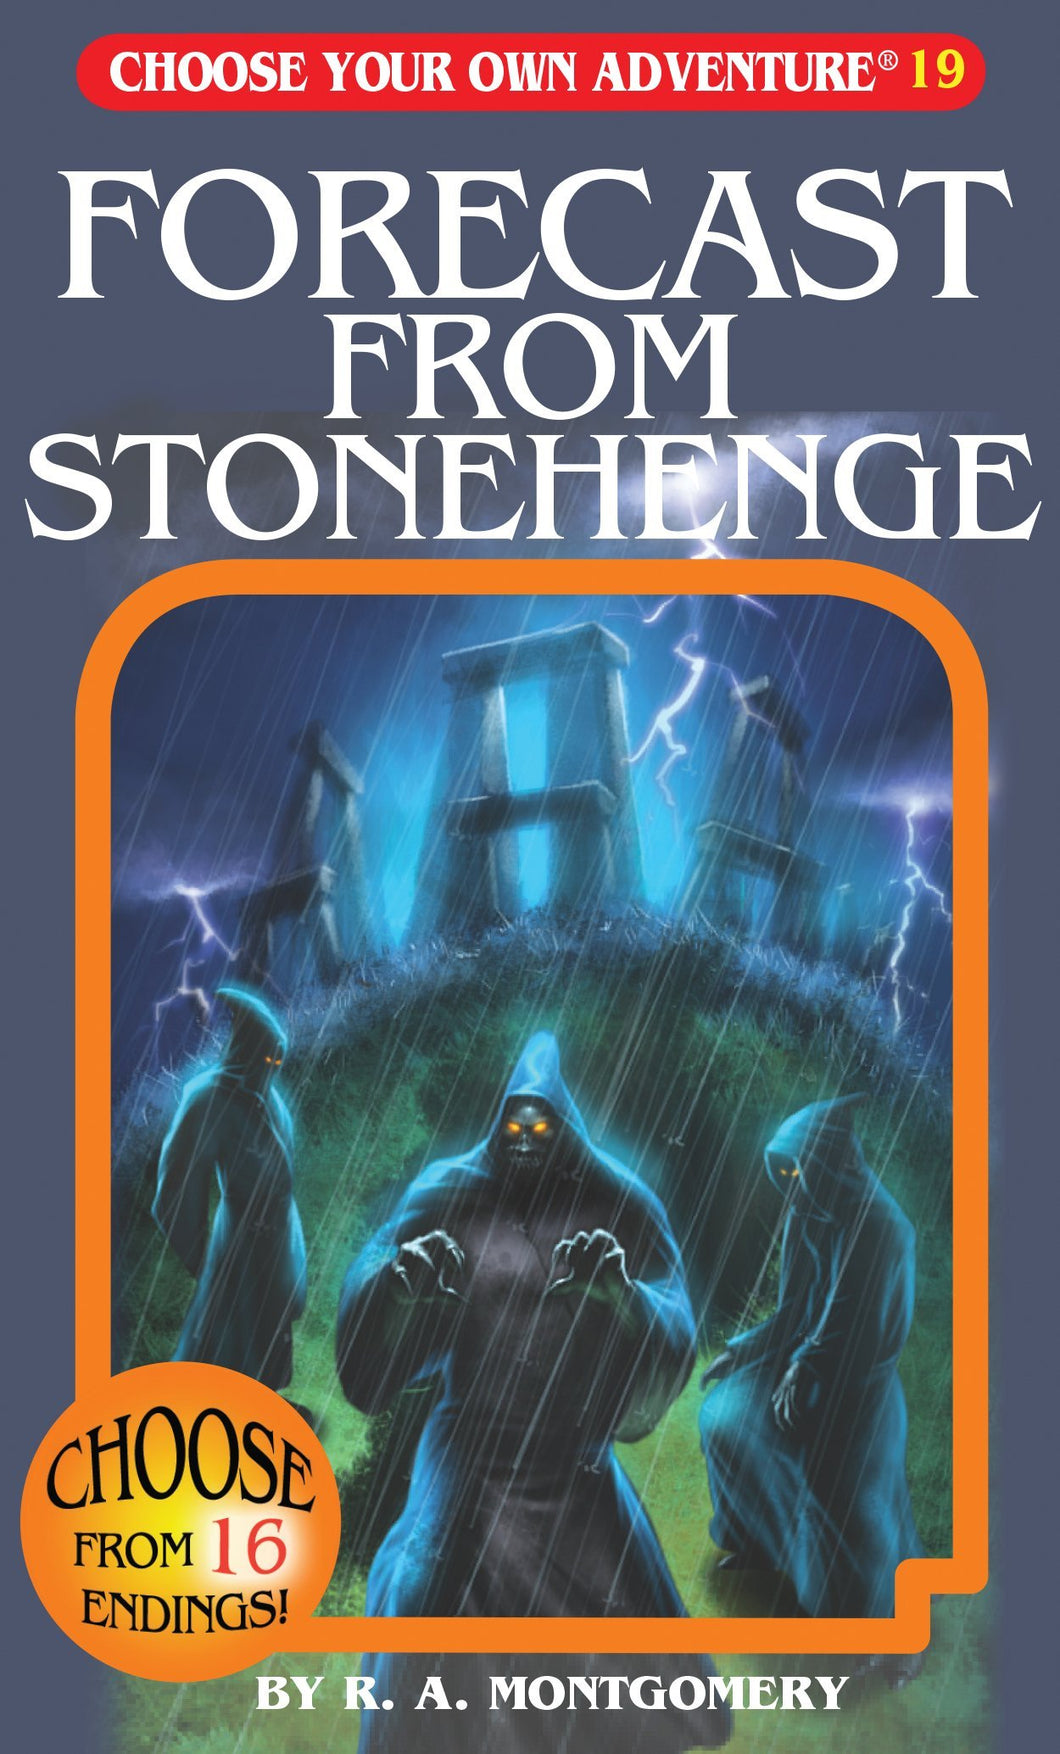 Choose Your Own Adventure Book-Forecast from Stonehenge#19